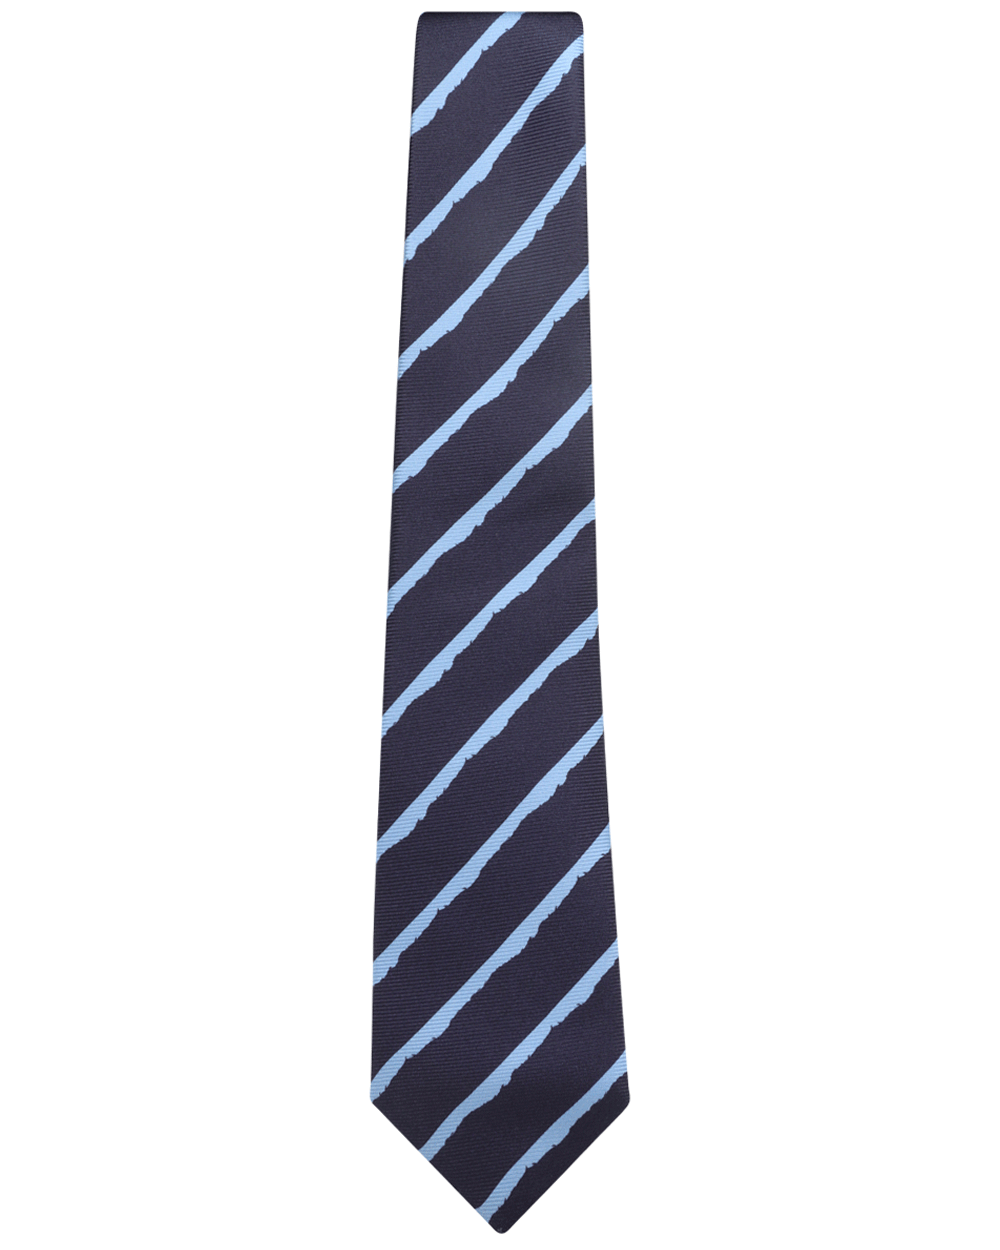 Navy and Light Blue Striped Tie